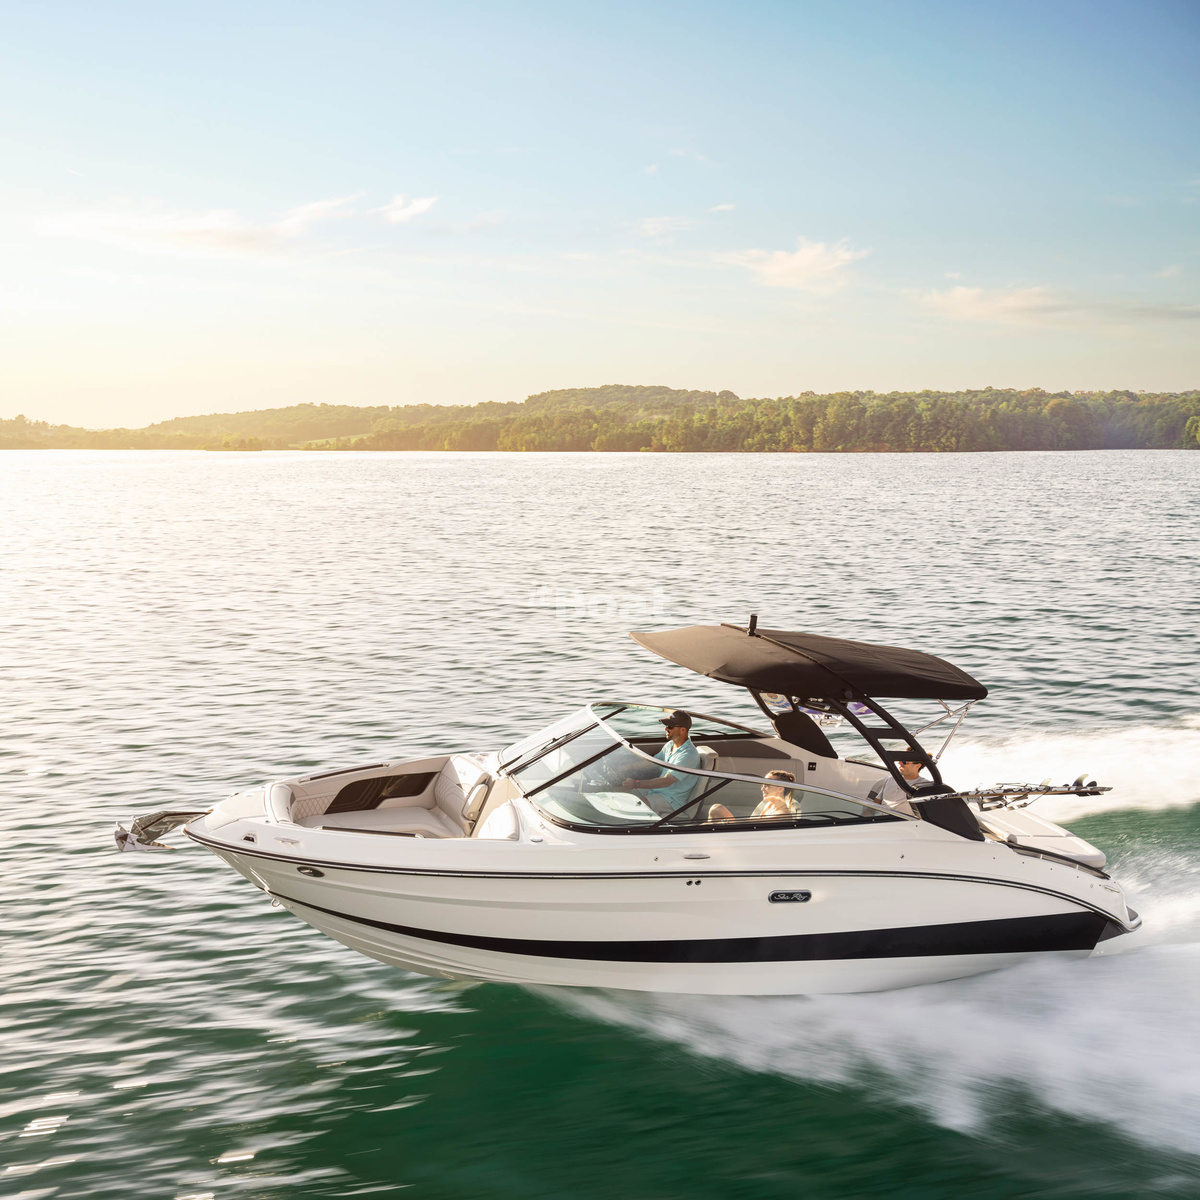 Sea Ray SLX 260 Surf Prices, Specs, Reviews and Sales Information itBoat